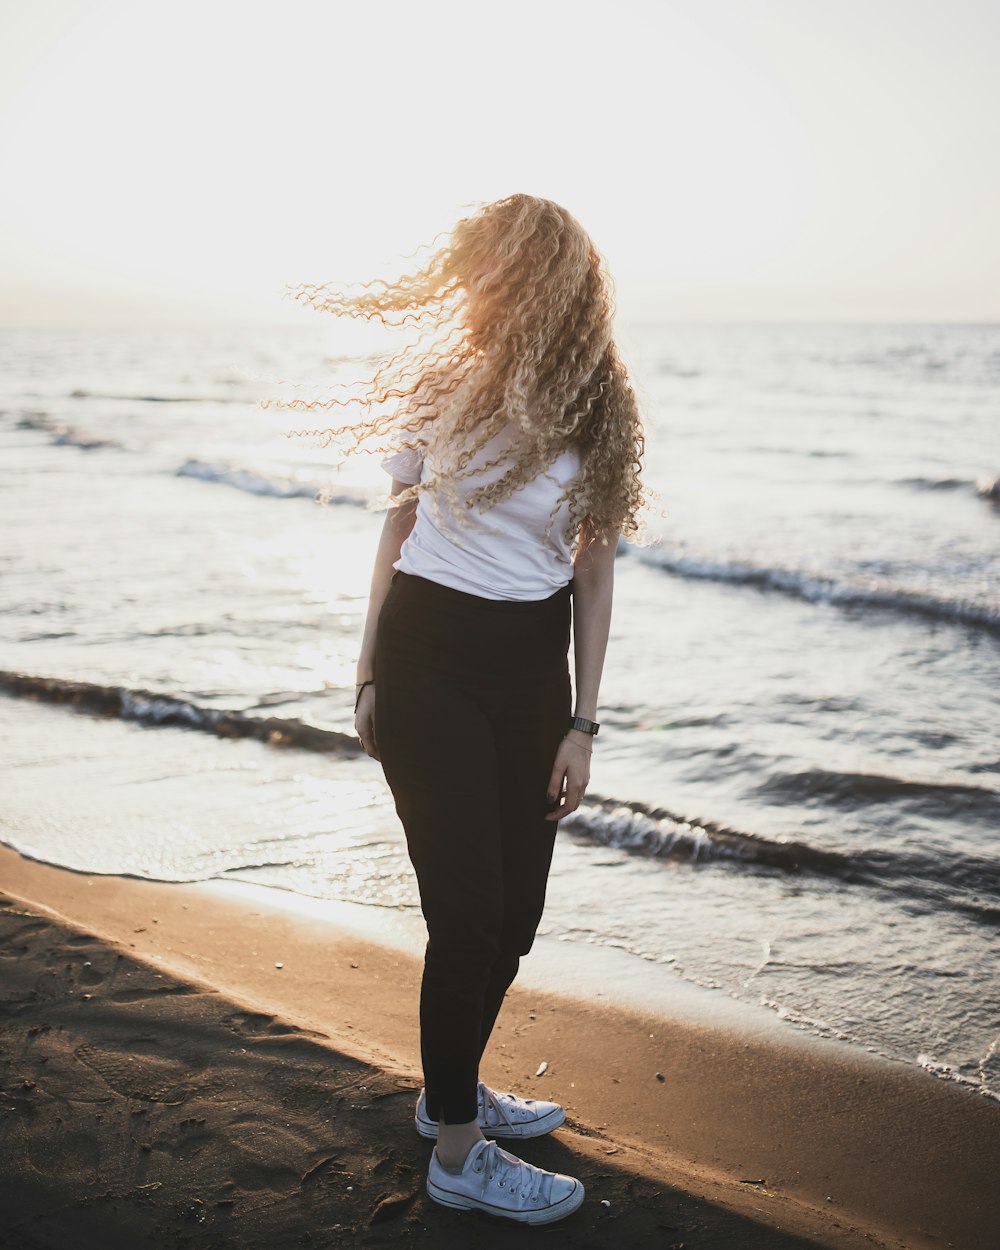 woman in white shirt and black pants standing on beach shore during daytime